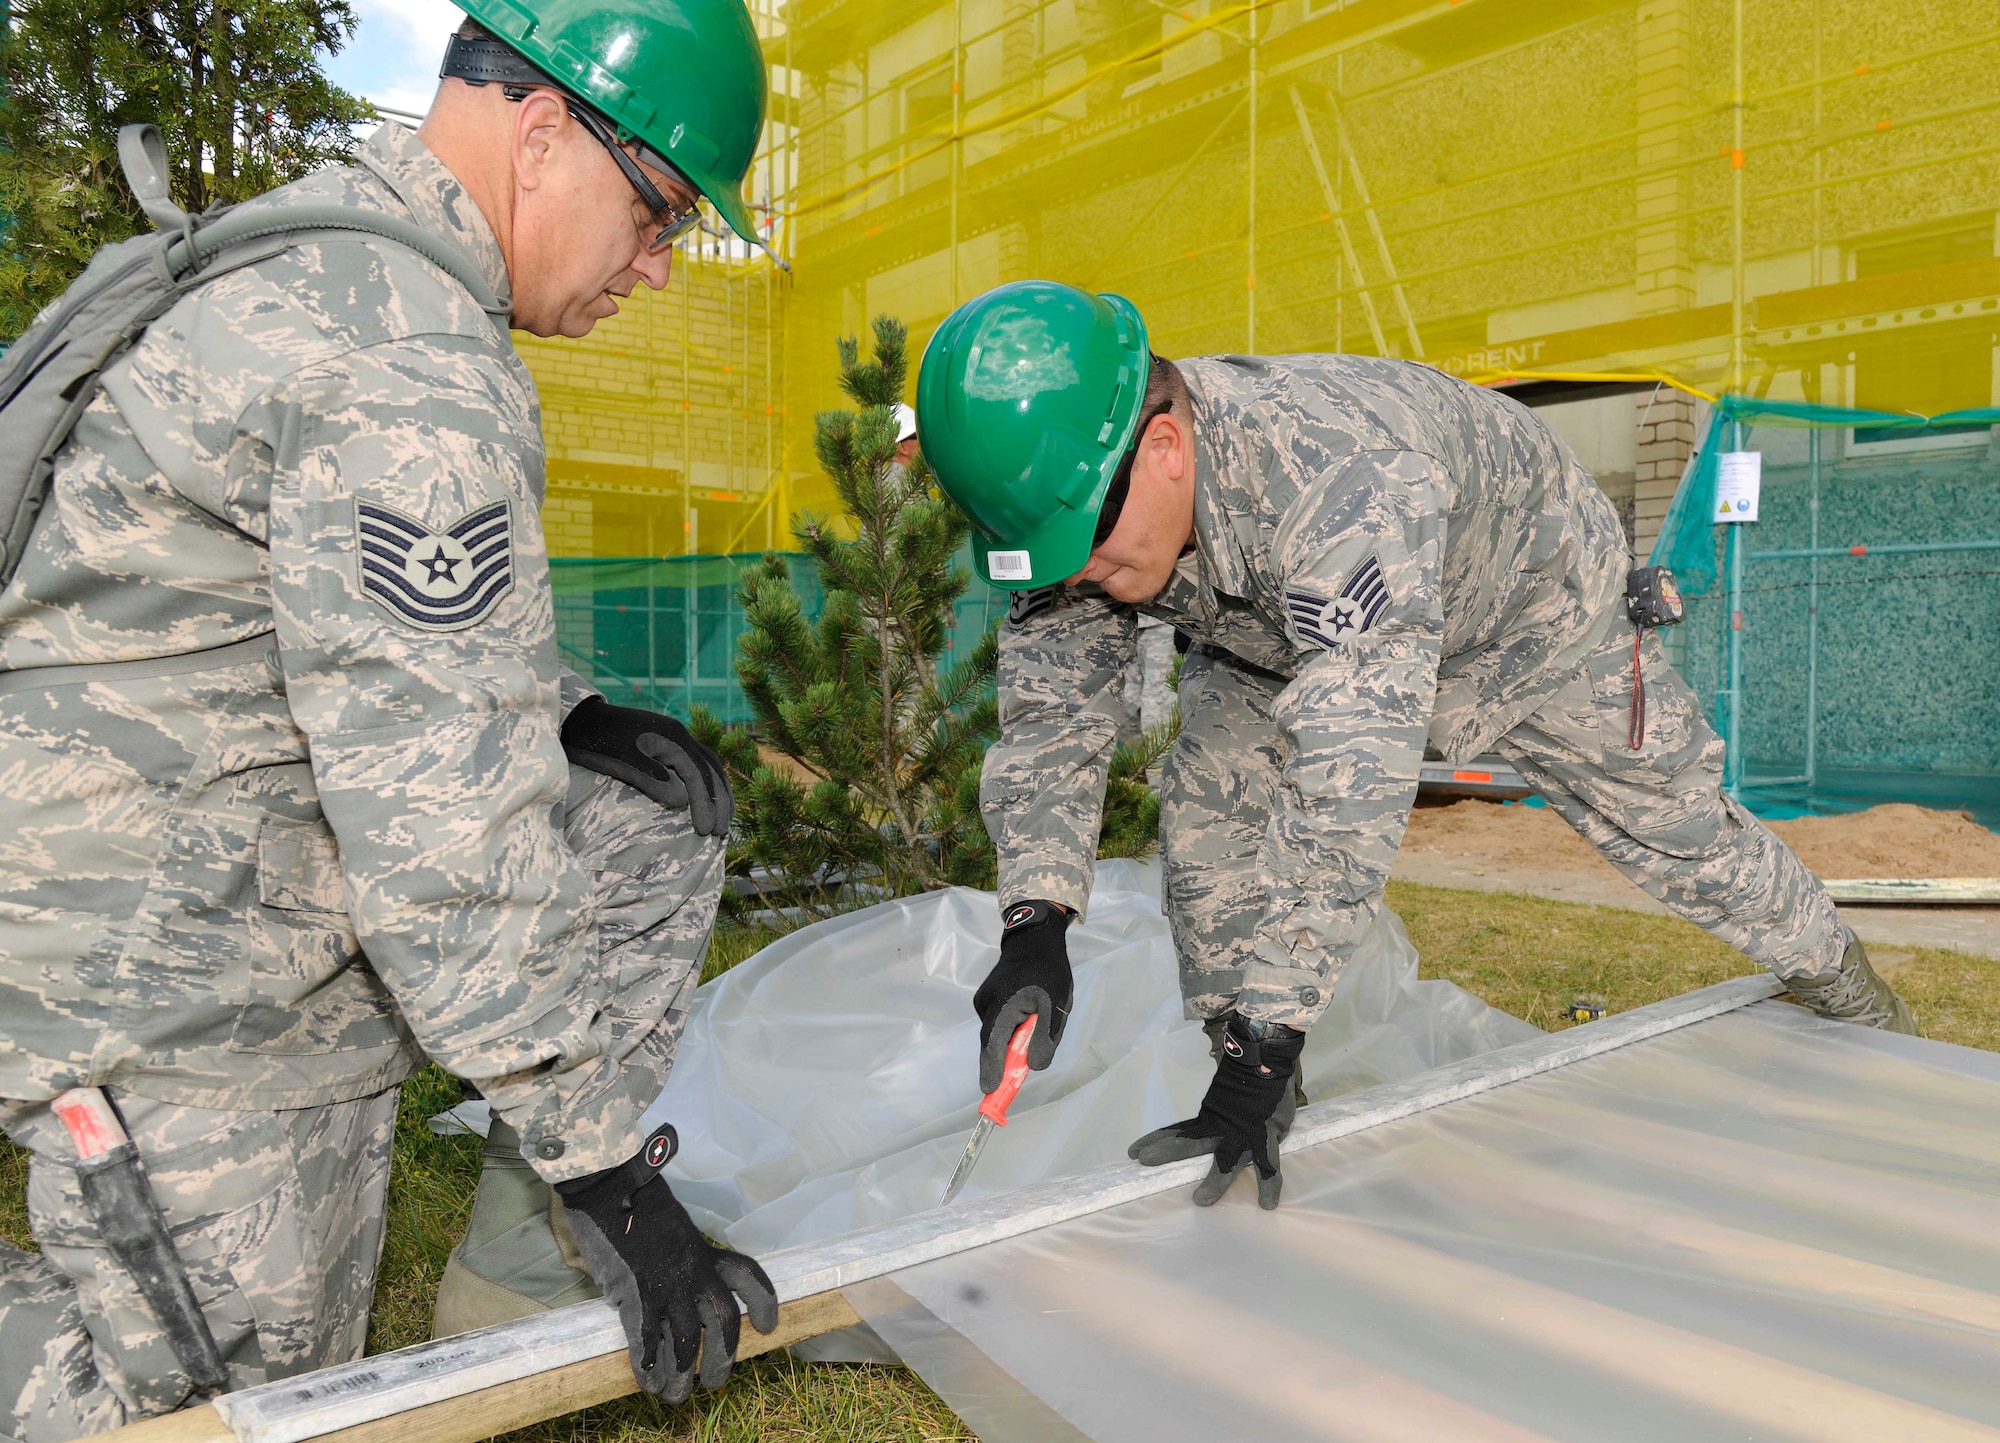 Tech. Sgt. Ken Wilson, 127th Civil Engineering Squadron HVAC supervisor and Staff Sgt. Jared Brunsen, 127th CES HVAC expert, cut sheet plastic at a kindergarten in Silmala, Latvia on June 18, 2016. The school’s renovations are part of a Humanitarian-Civic Assistance project. The project provides training opportunities for the United States and Latvian soldiers as well as a benefit for the local community. (U.S. Air National Guard photo by Senior Airman Ryan Zeski)